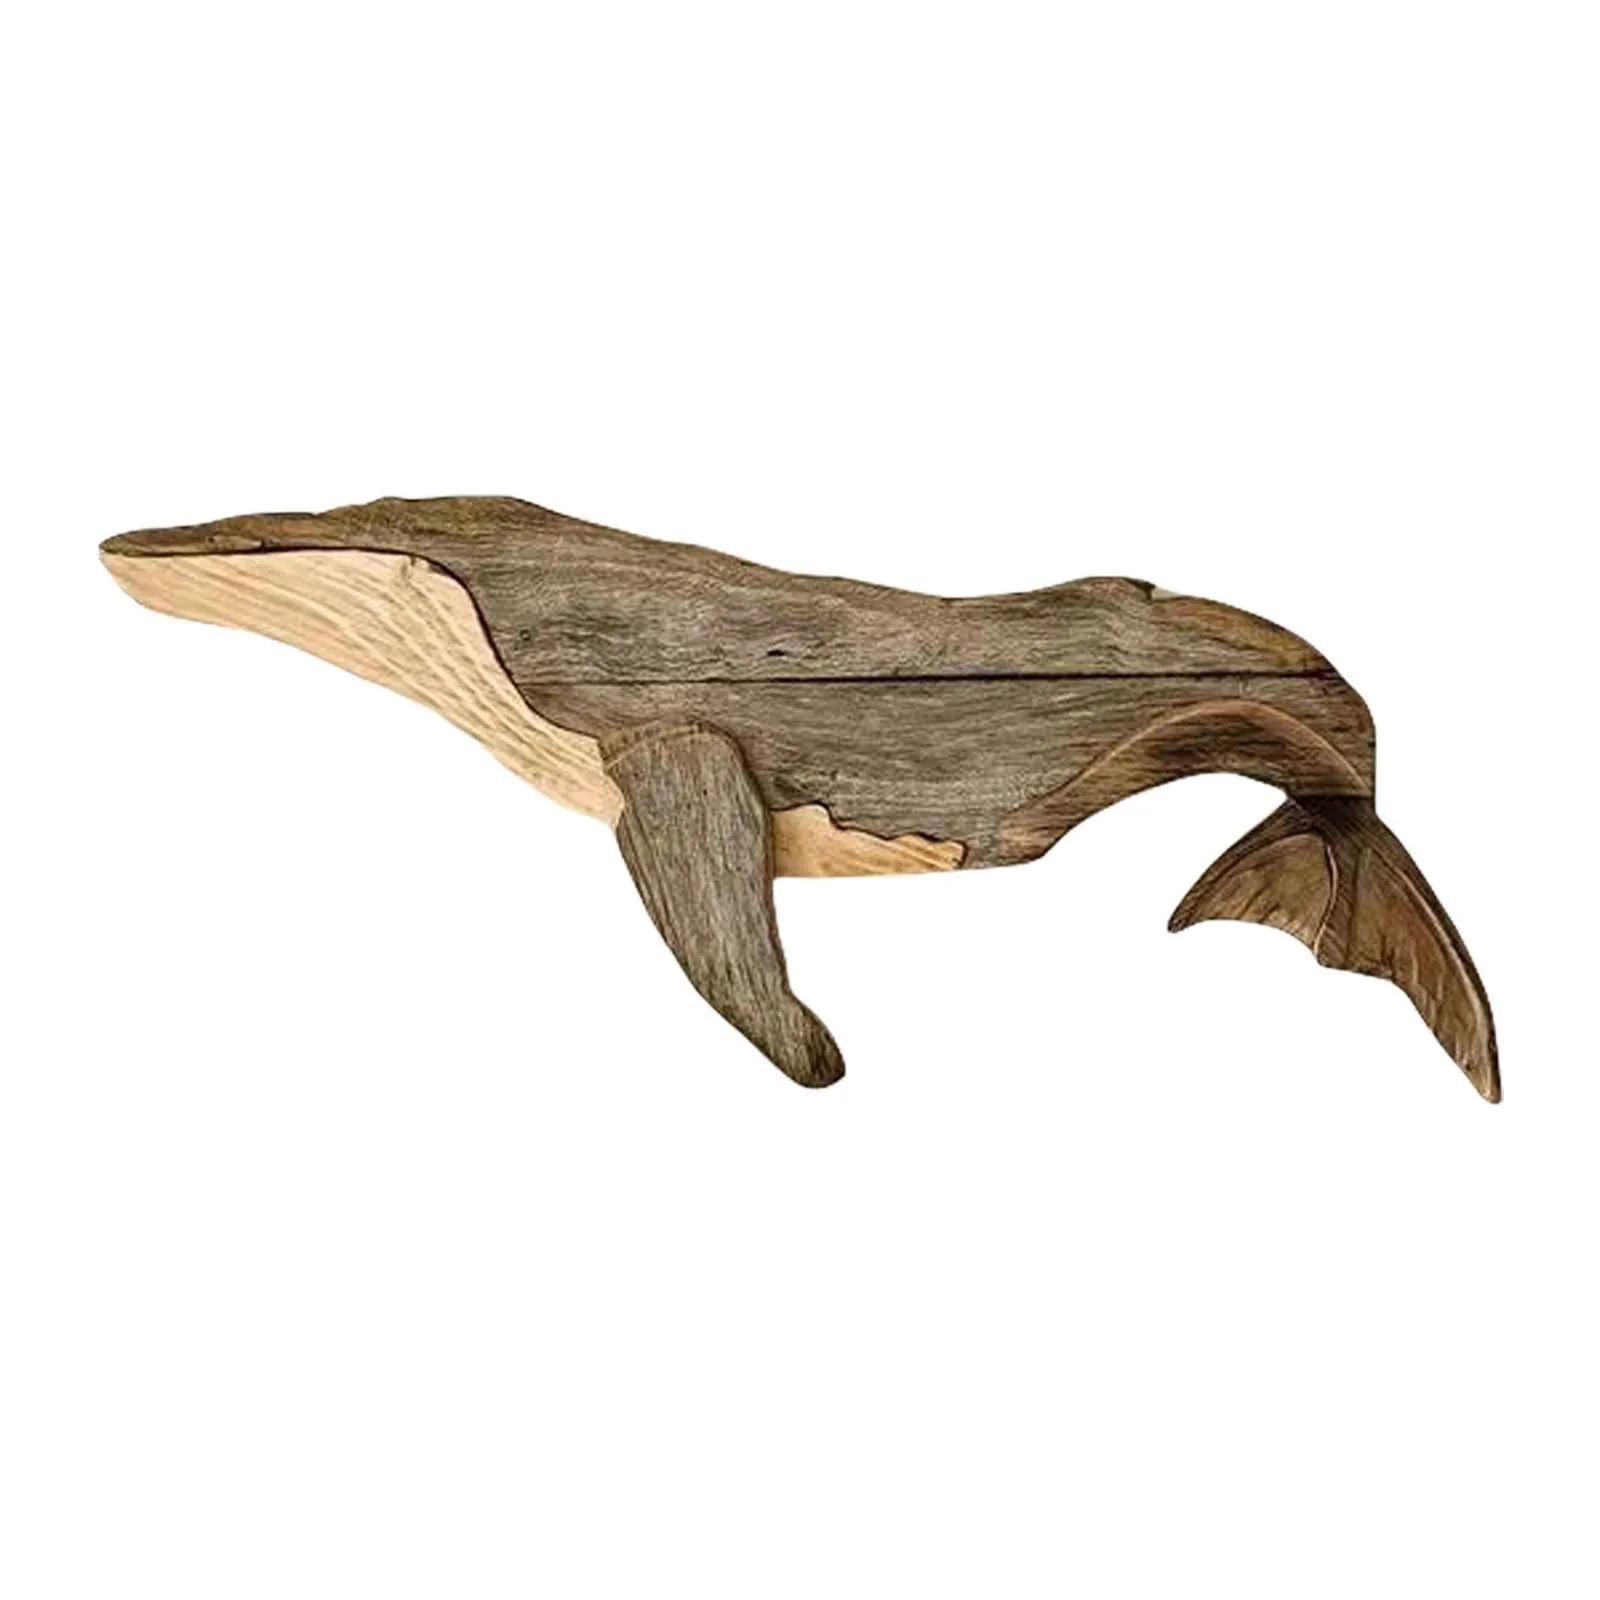 Cheap Wooden Sea Fish Decor Statue Whale Figurine Sculpture Ornament Rustic  Decoration Wall Hanging Decoration For Living Room Bedroom